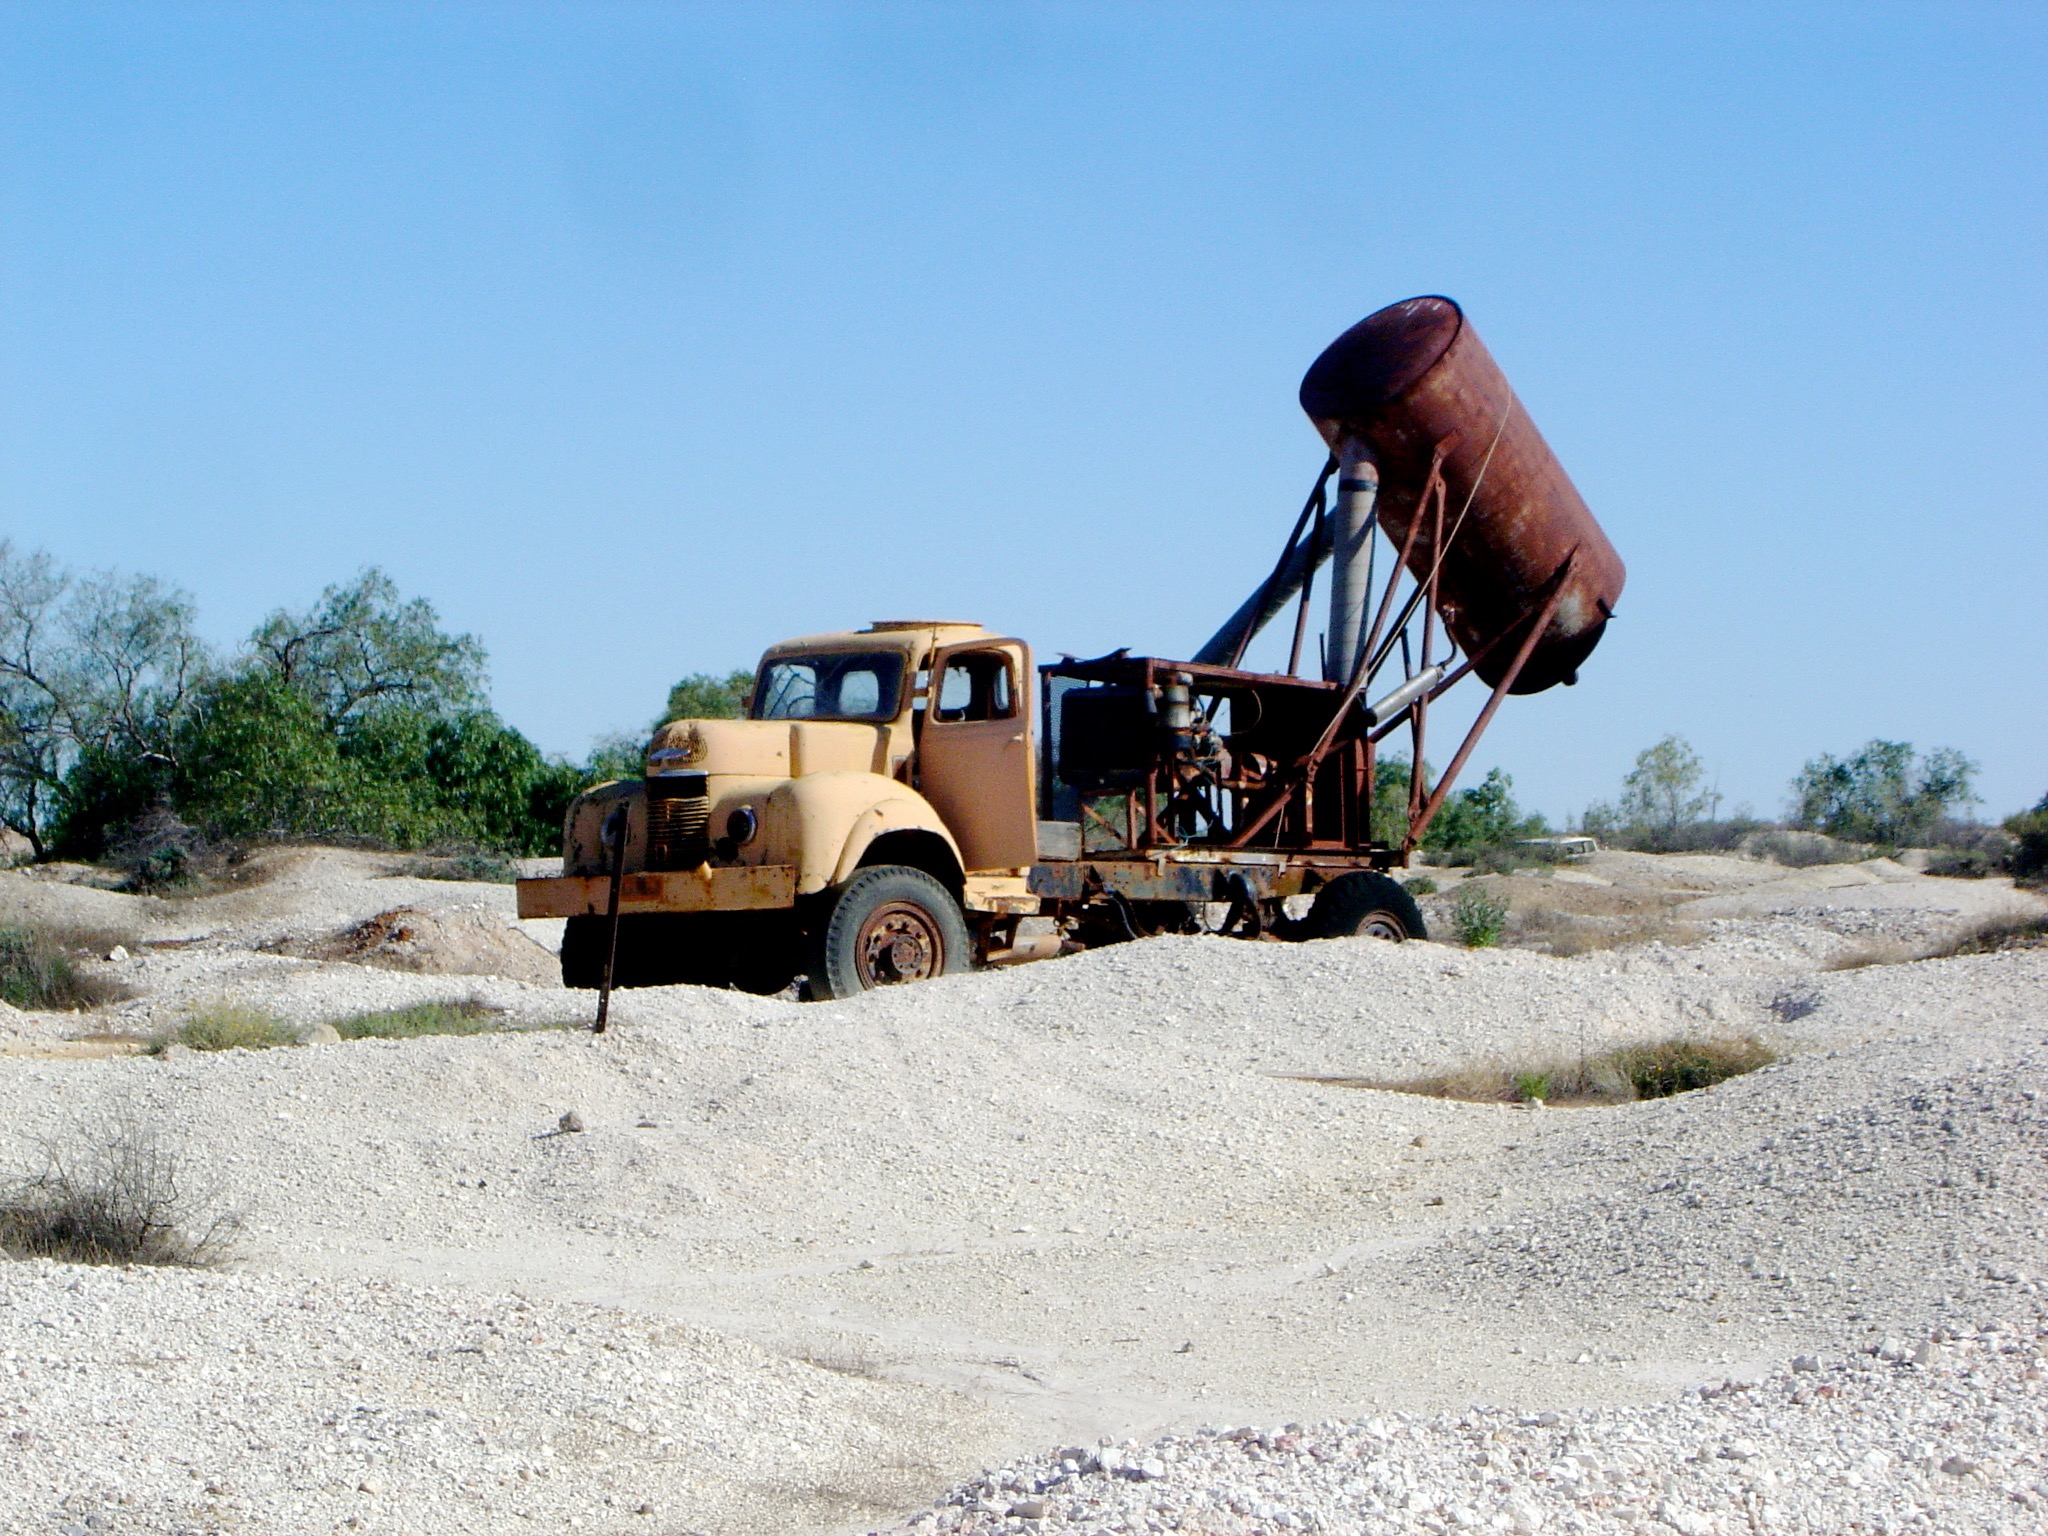 Old truck used for blowing opal dirt